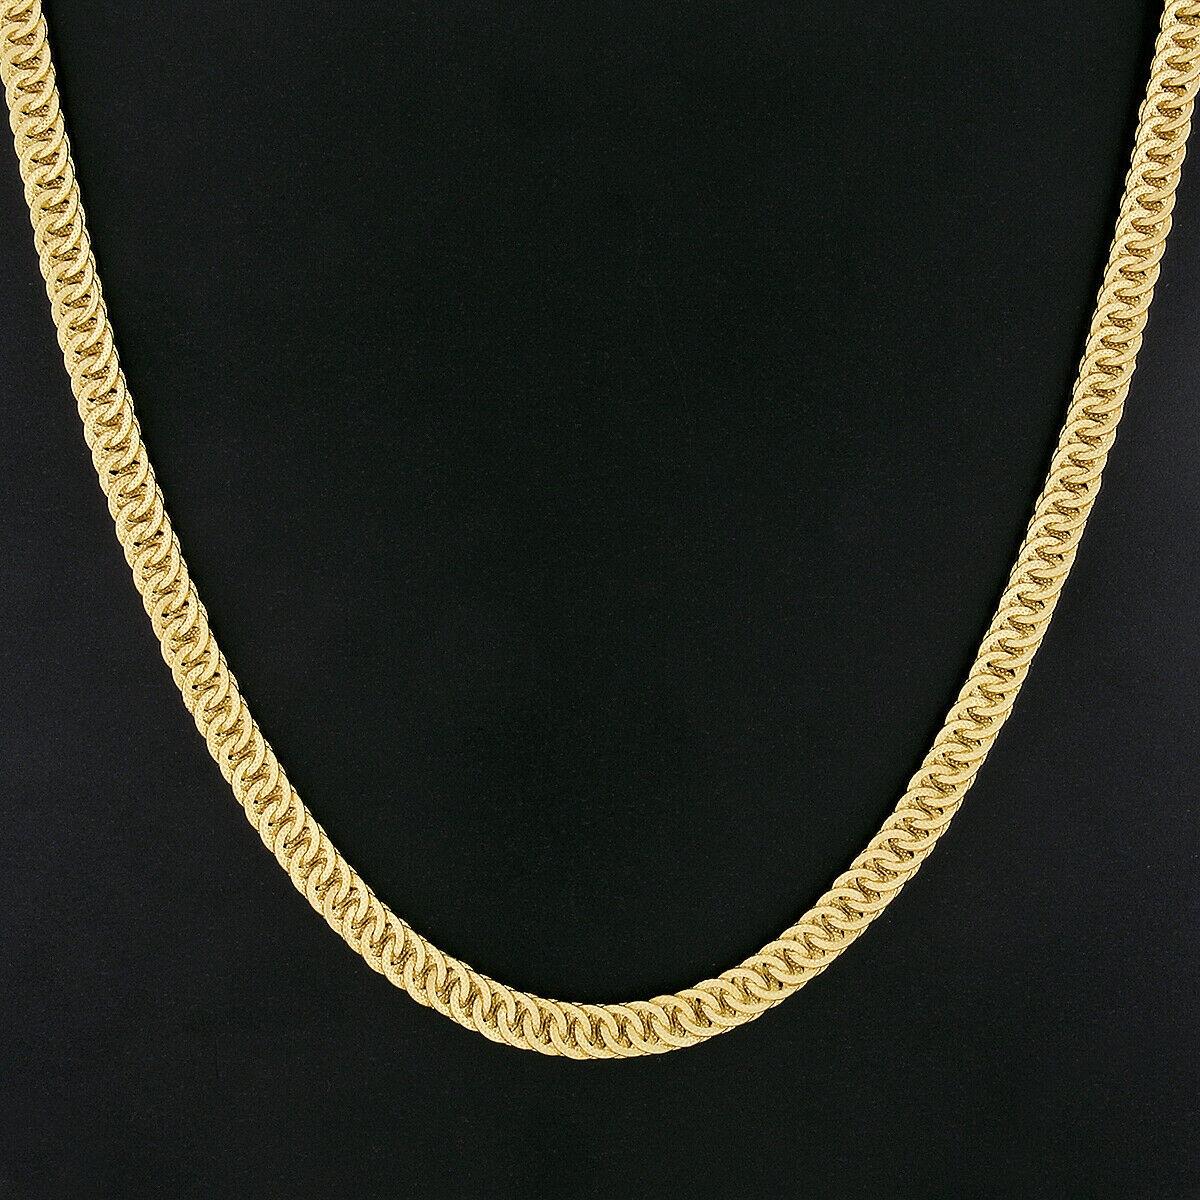 Here we have an absolutely magnificent statement necklace that was crafted in Italy from solid 18k yellow gold. The chain was designed by Giovanni Marchisio and it features very fine and well made, textured circular links that elegantly interlock